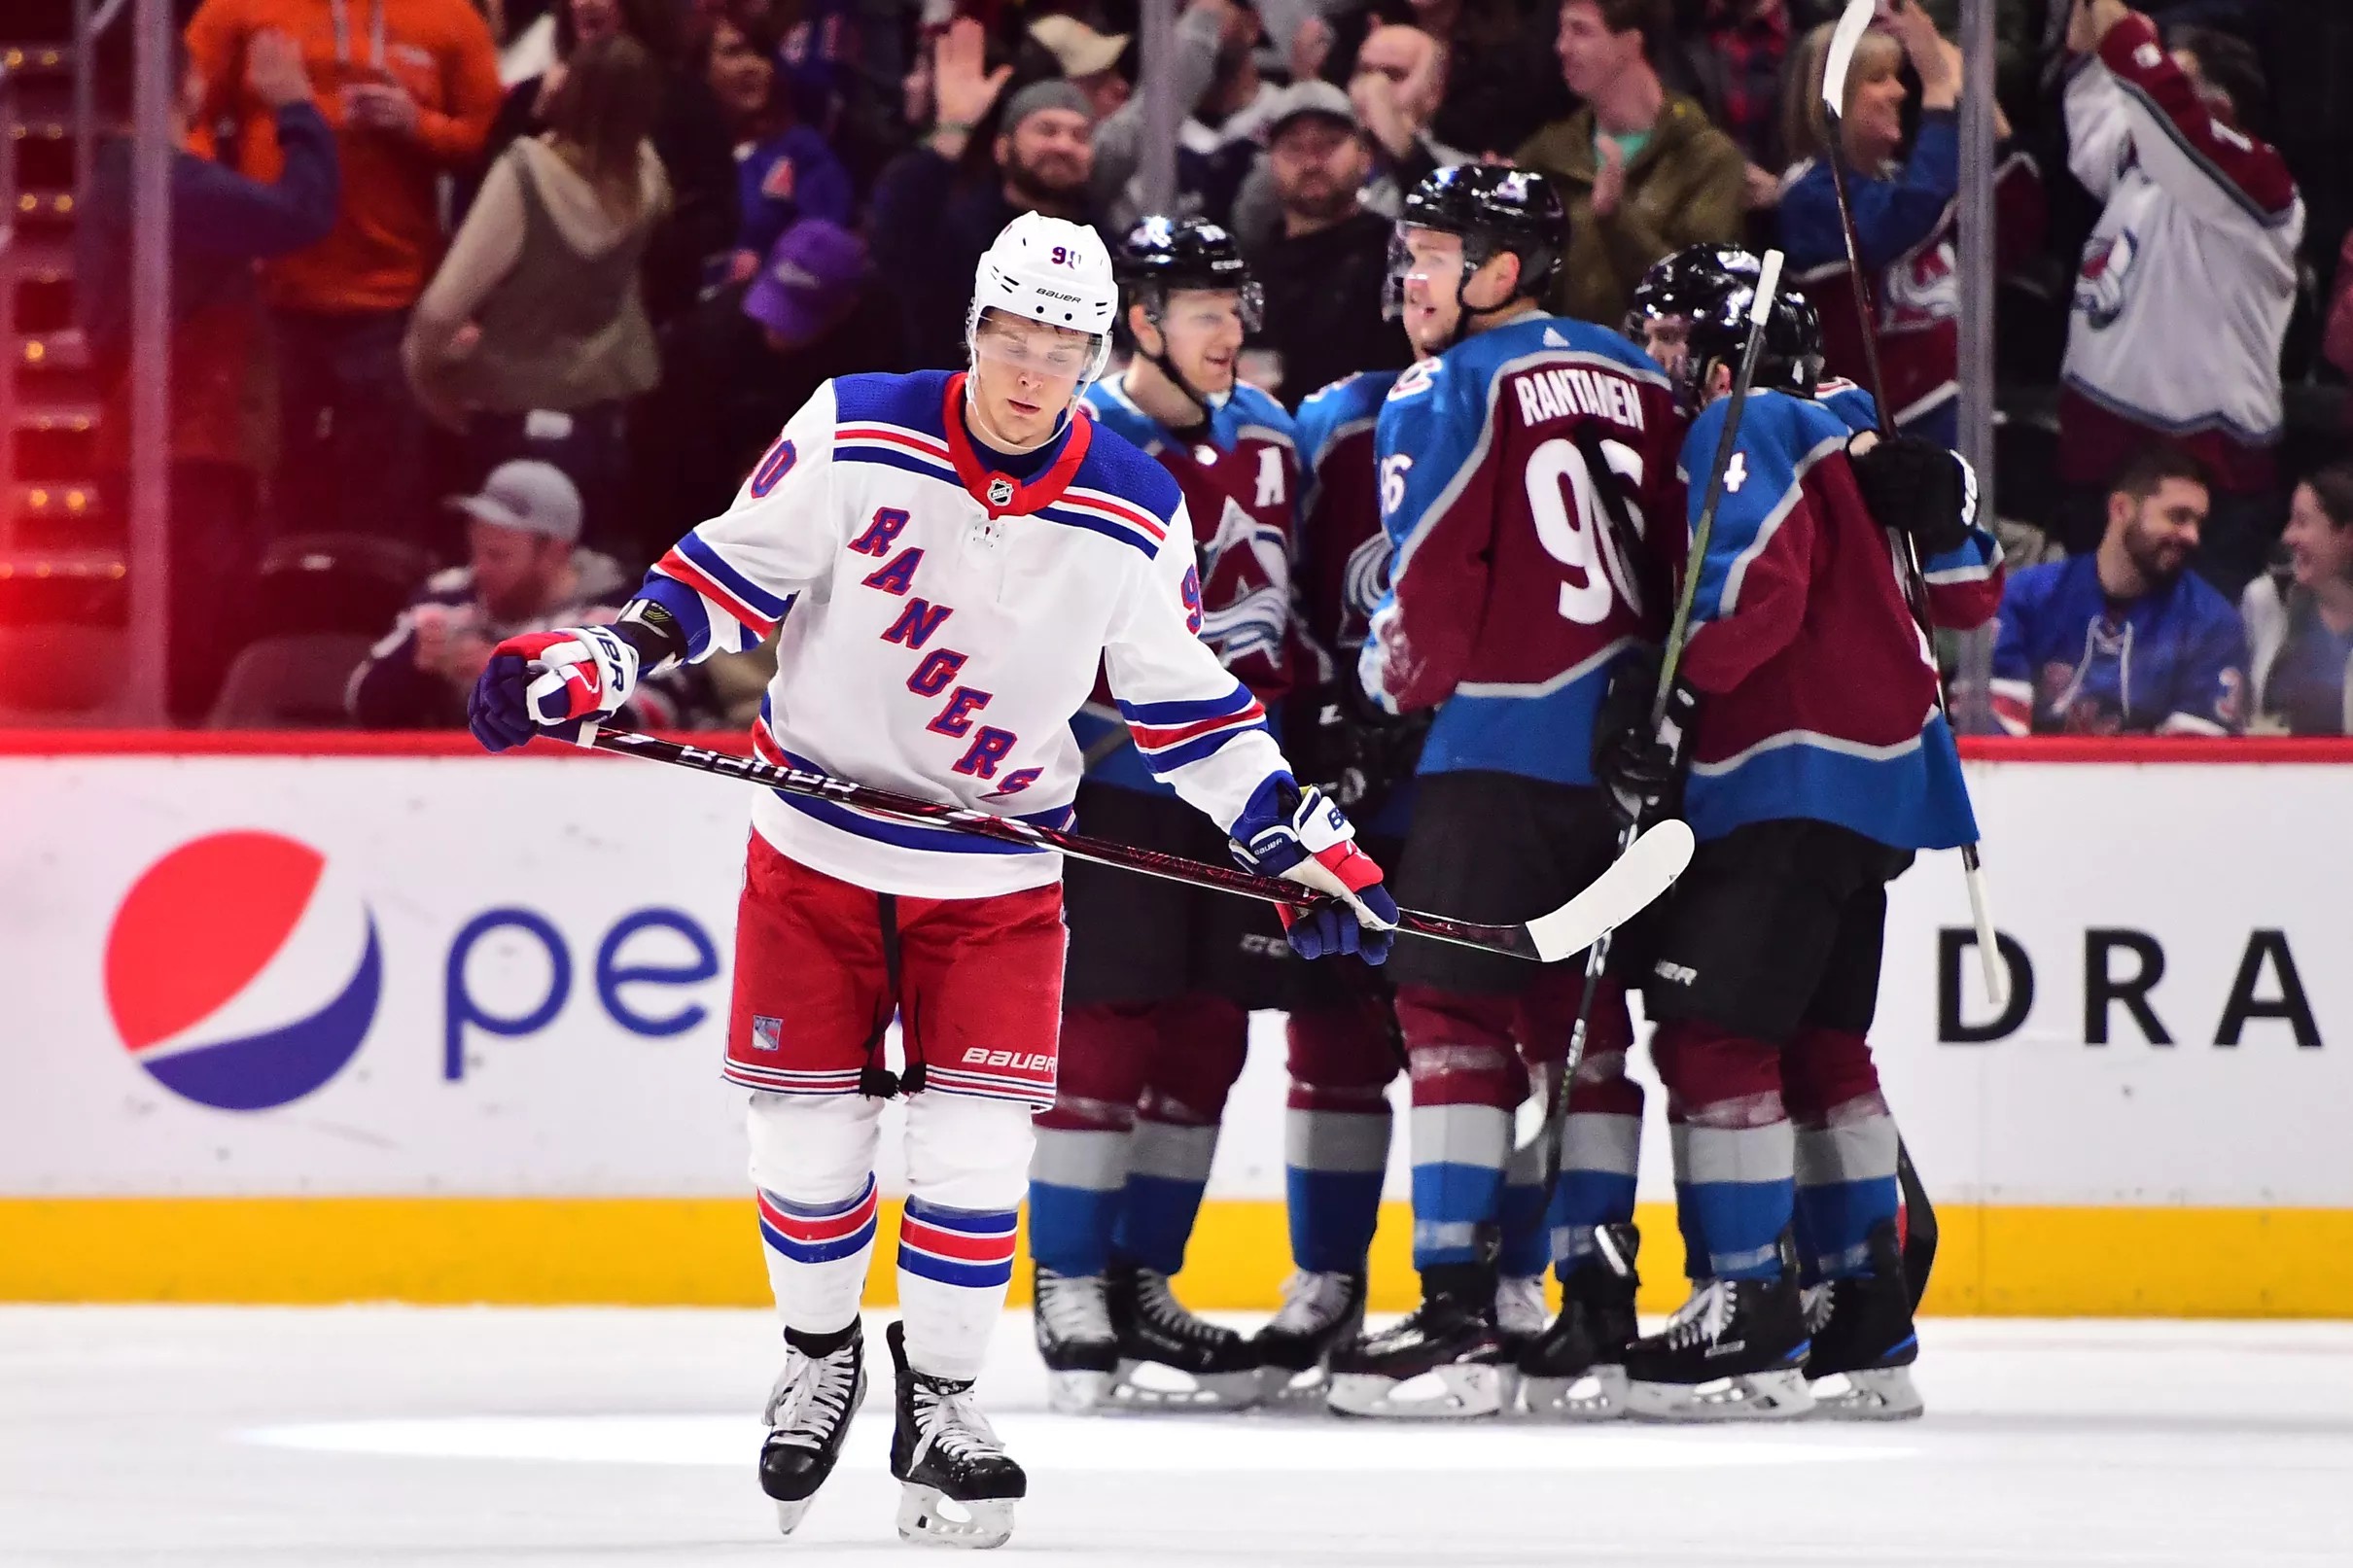 Rangers vs Avalanche Rangers Embarrassed in Colorado, Lose Third